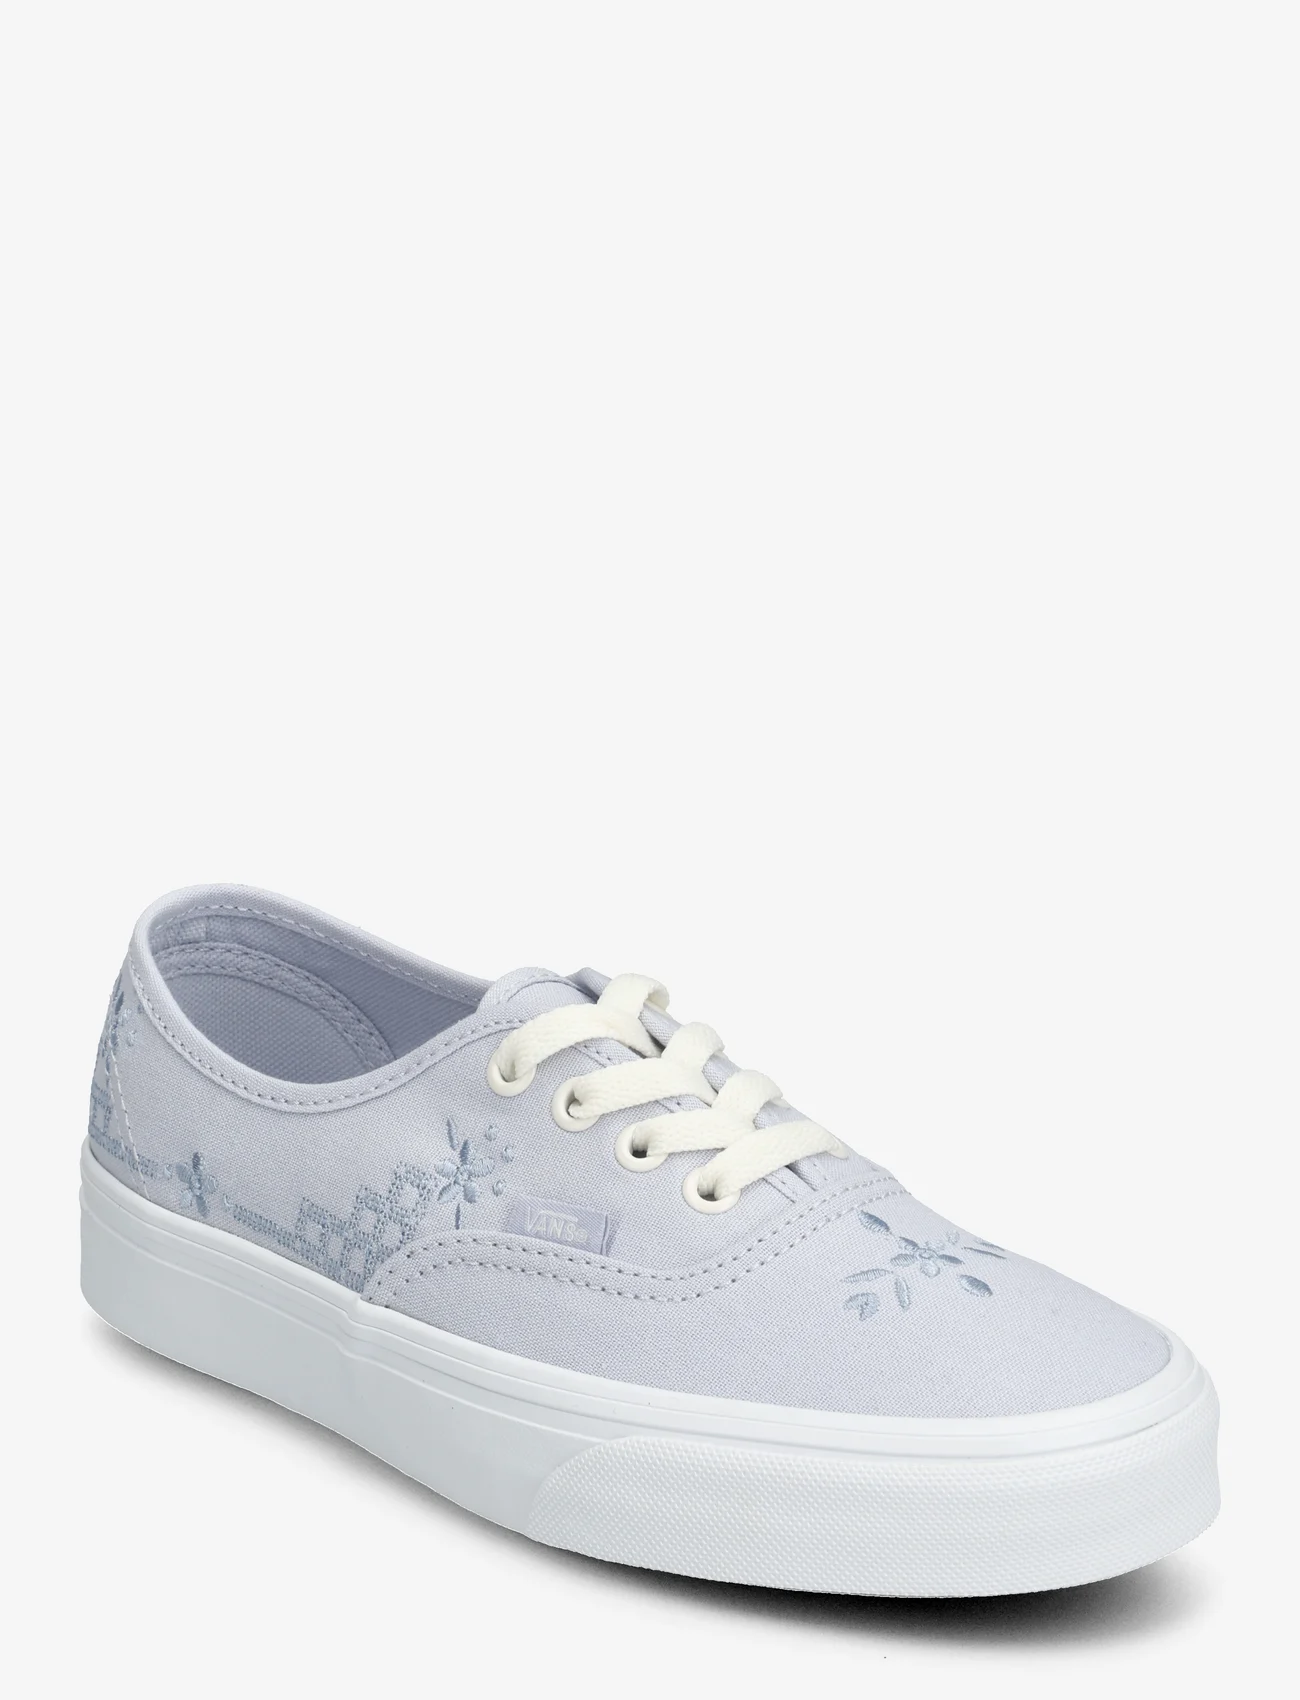 VANS - Authentic - sneakers - craftcore dusty blue - 0